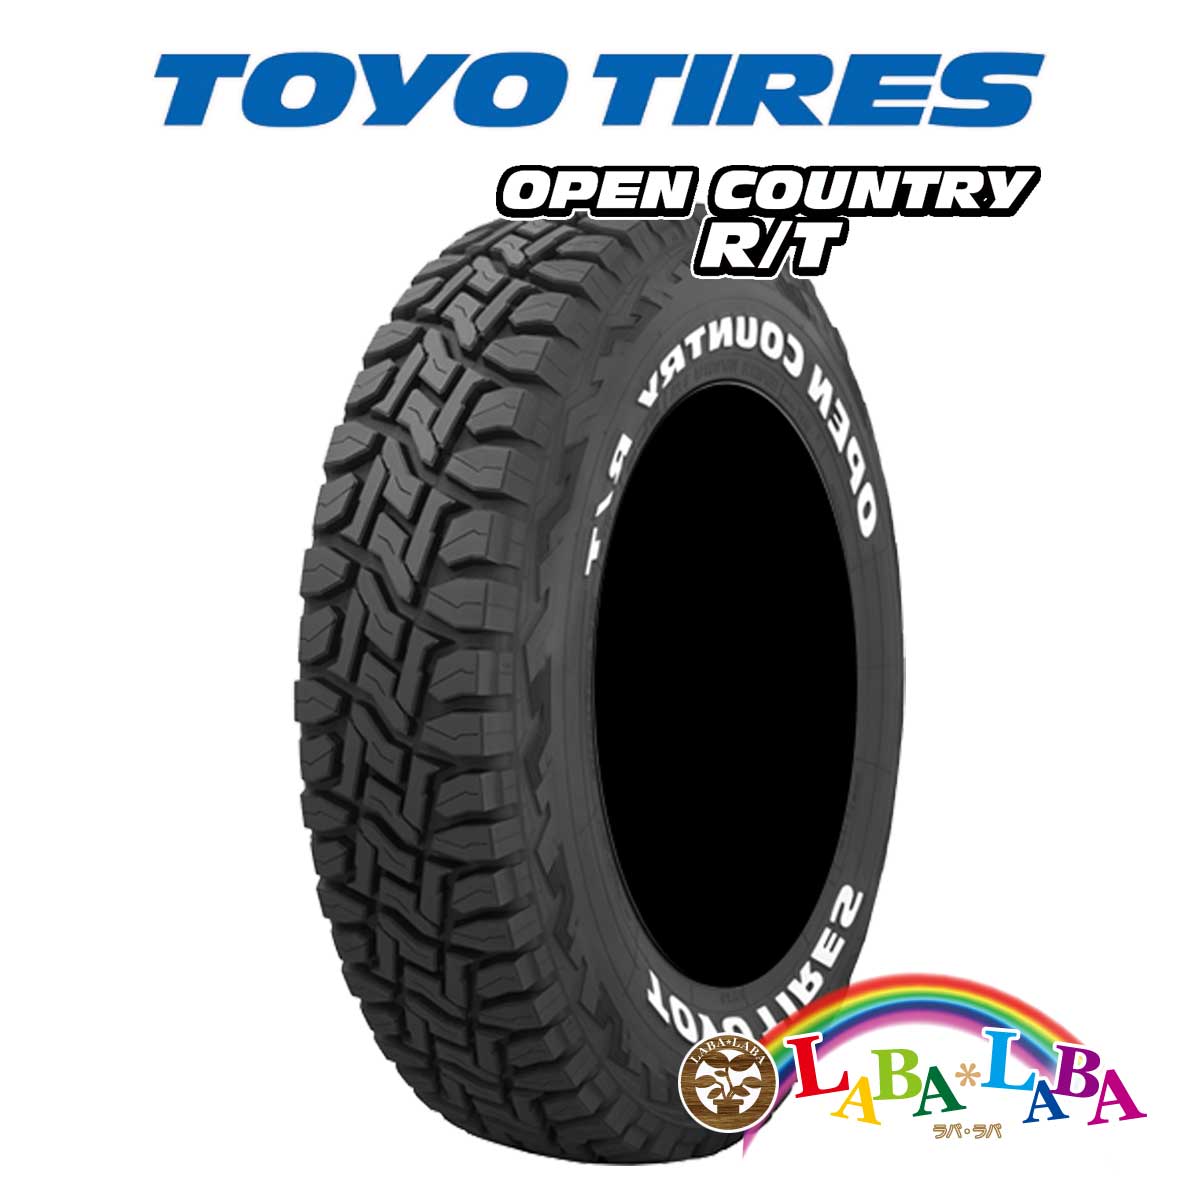 TOYO OPEN COUNTRY R/T (RT) 165/80R14 97/95N ホワイトレター 4本セット